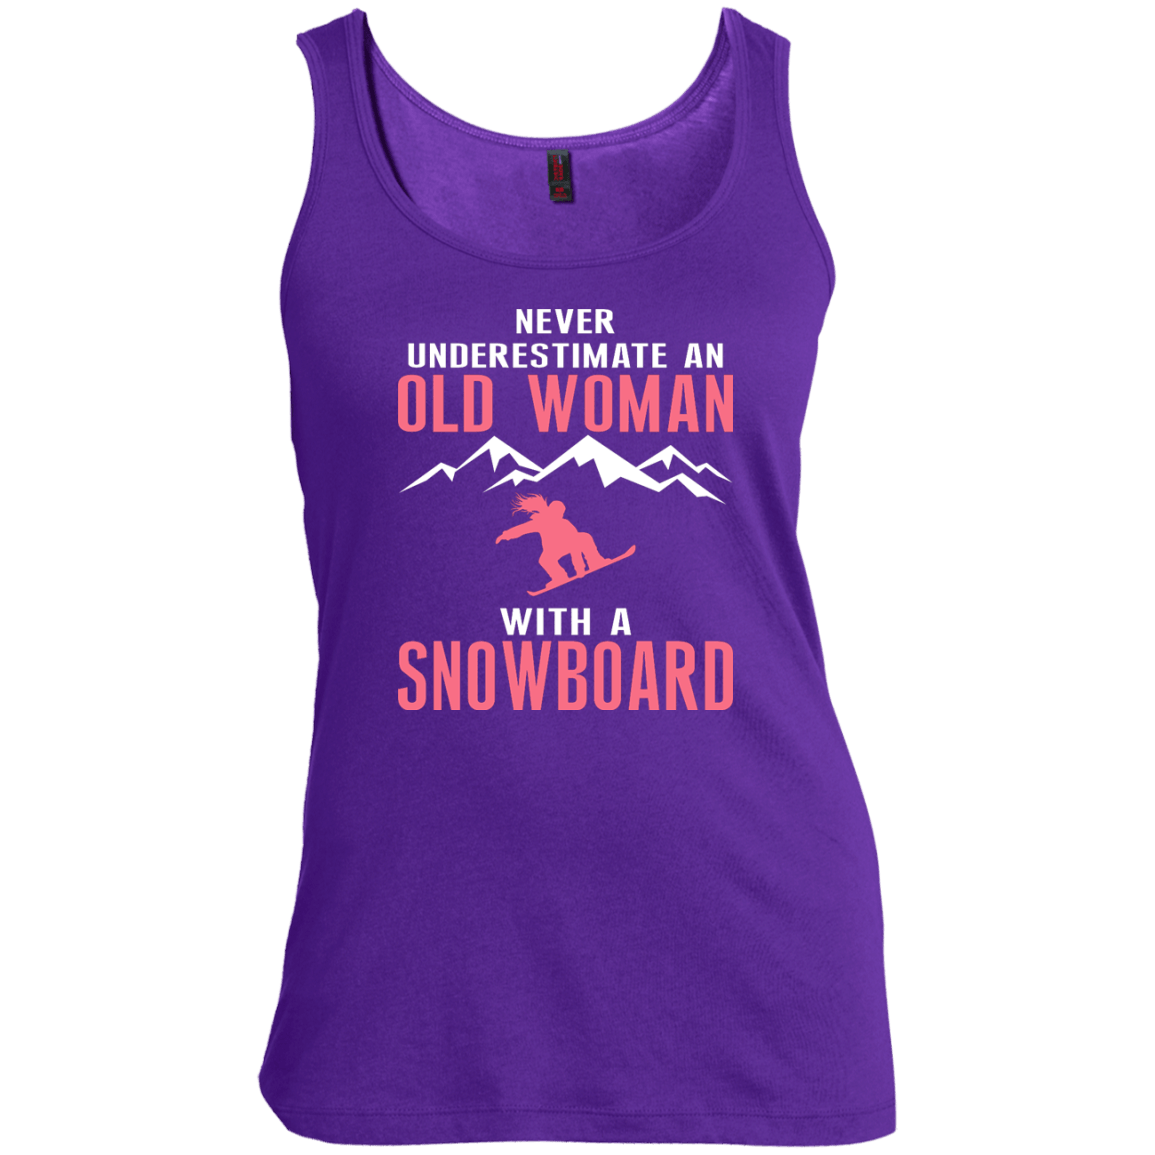 Never Underestimate An Old Woman With A Snowboard Tank Tops - Powderaddicts